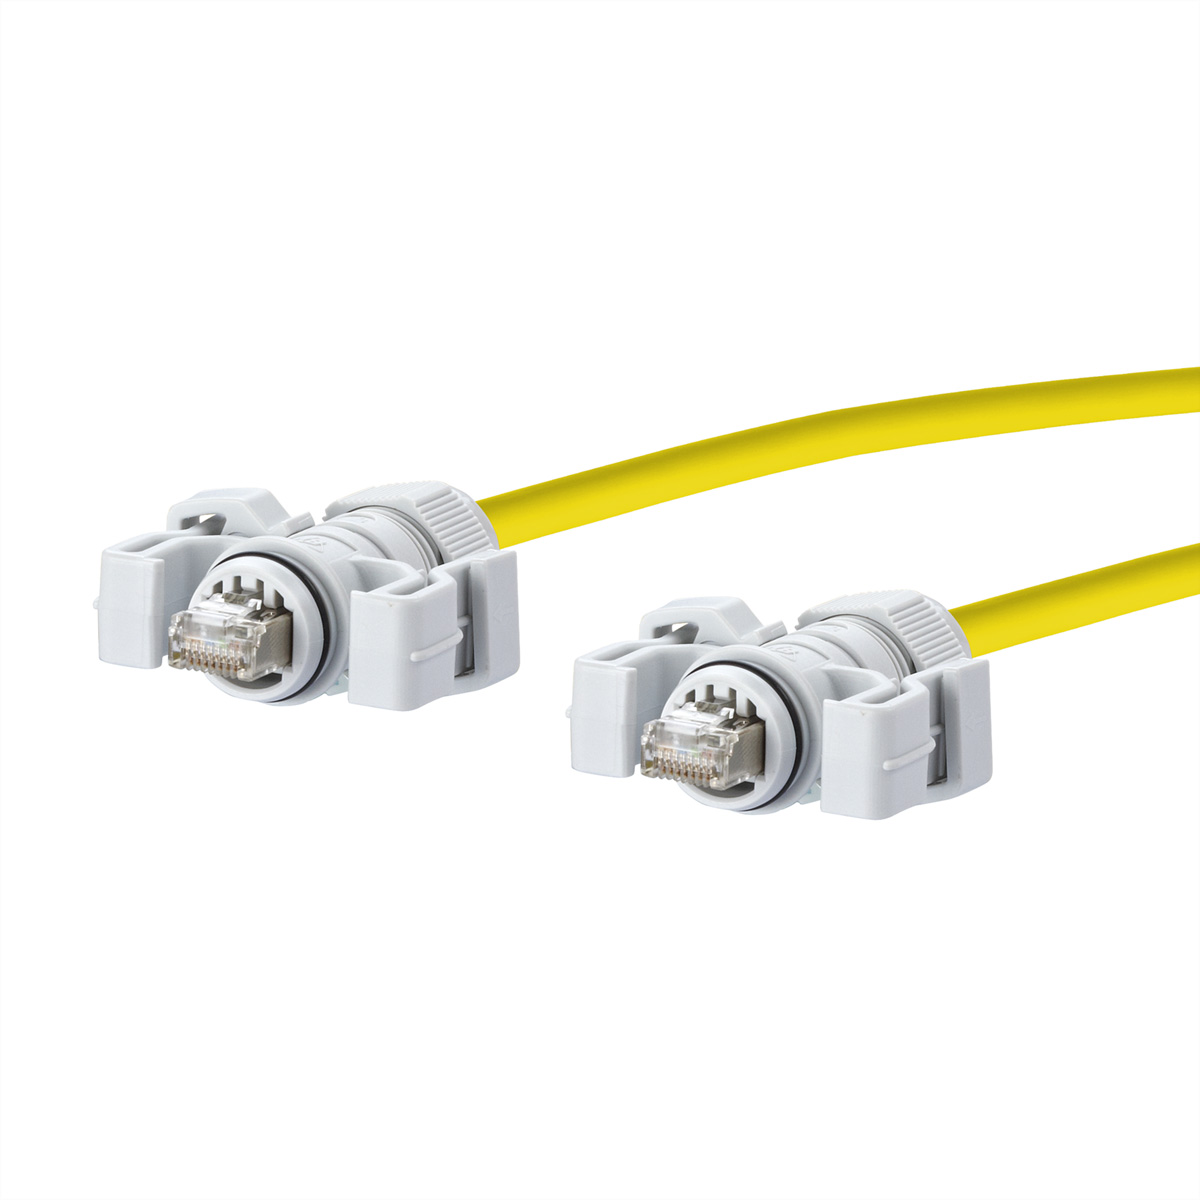 METZ CONNECT E-DAT Industry Patchkabel V6, IP67 - IP67, 10 m